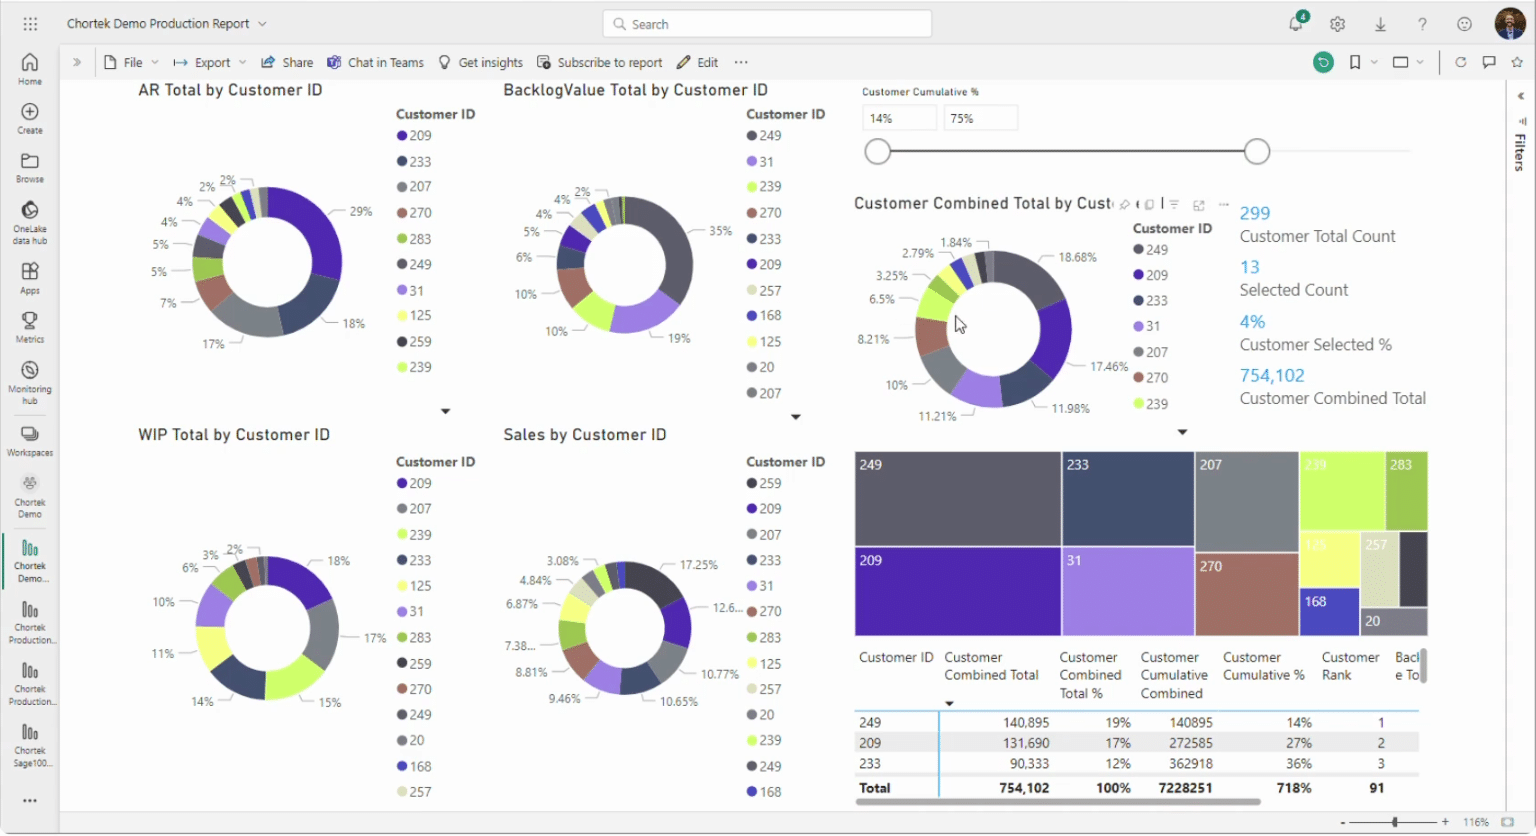 Power BI Screenshot showing an aggregated view of the top 75% of customers.